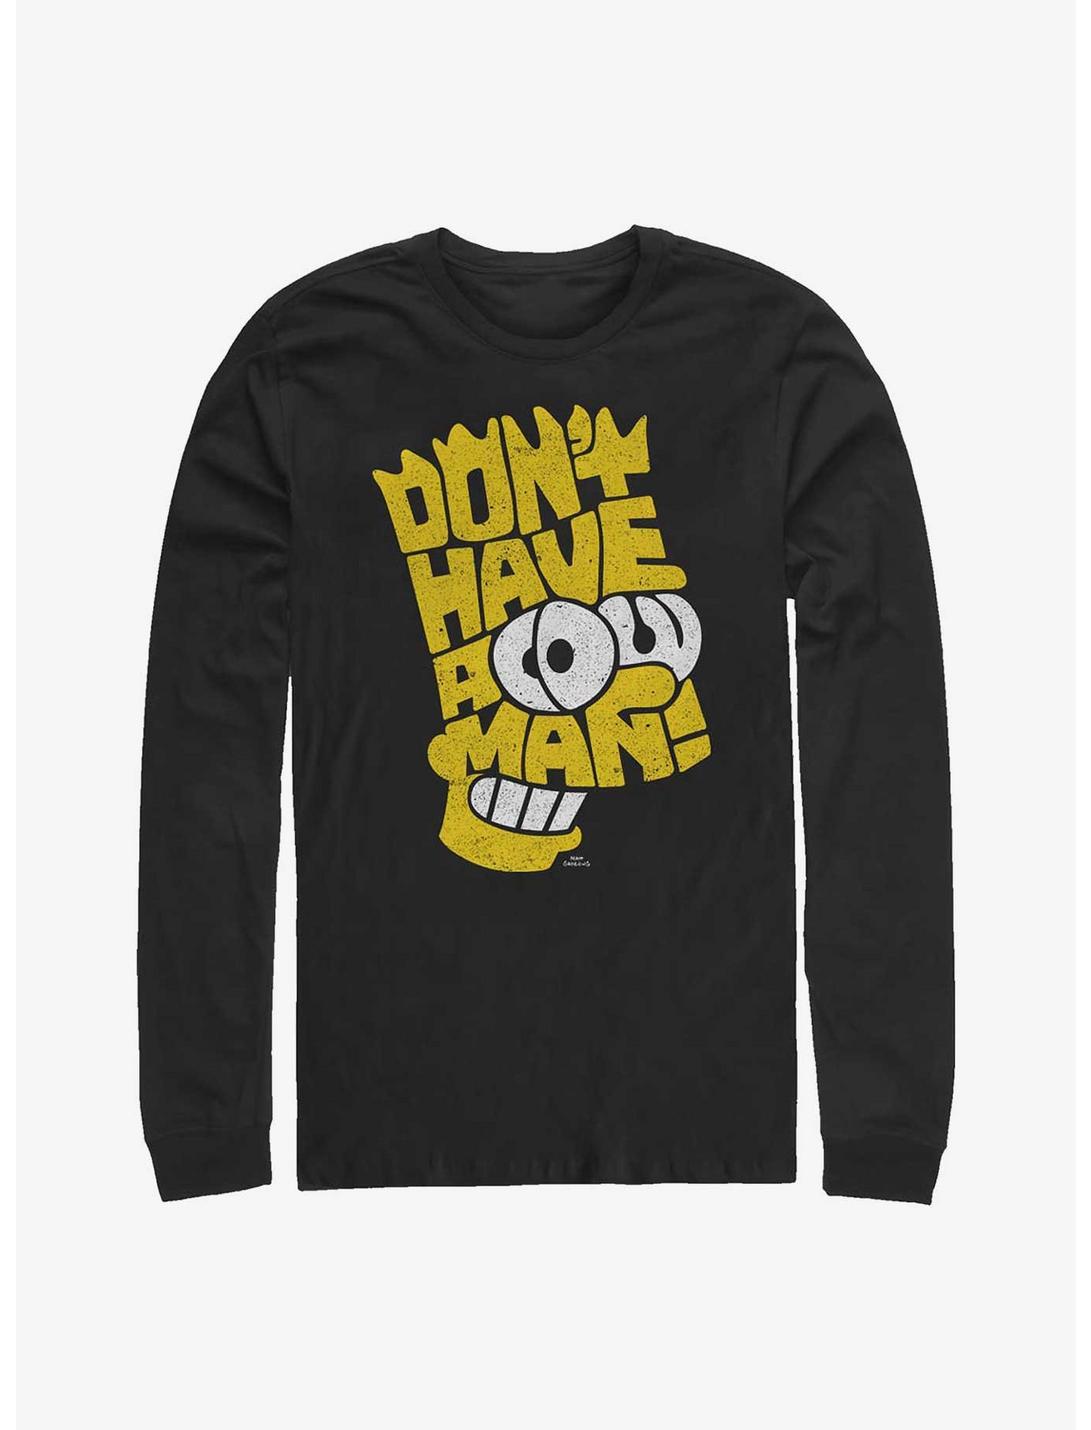 The Simpsons Bart Don't Have A Cow Man Long-Sleeve T-Shirt, BLACK, hi-res